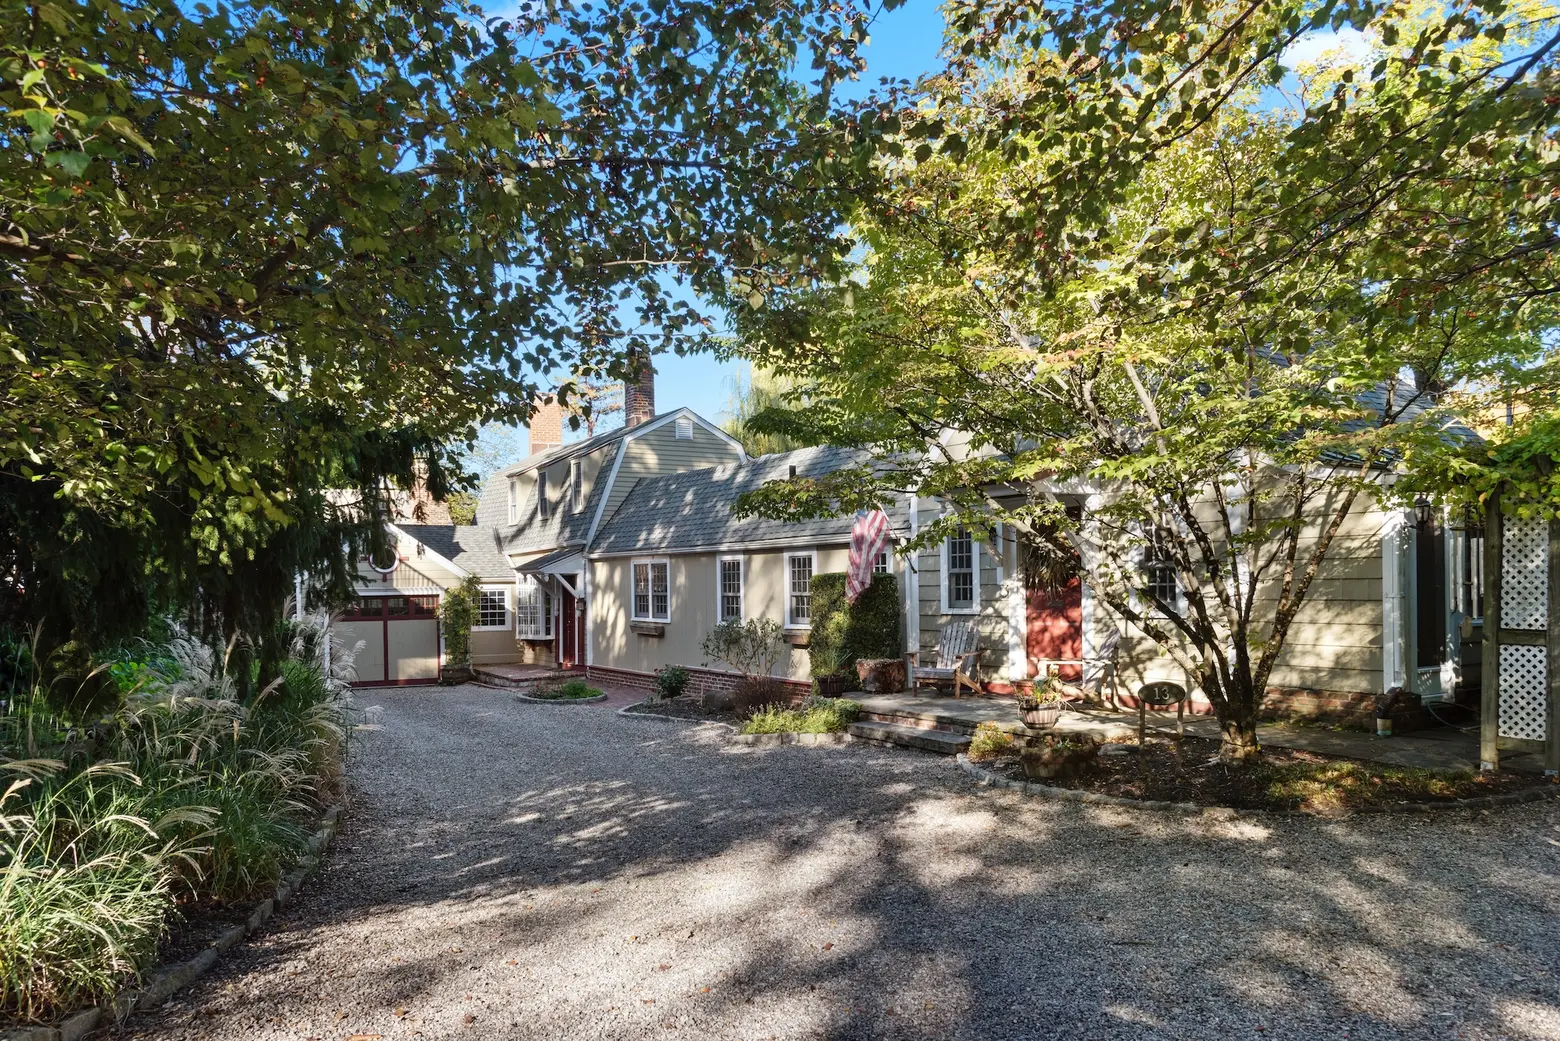 13 Heritage Hill Road, Tarrytown, Westchester